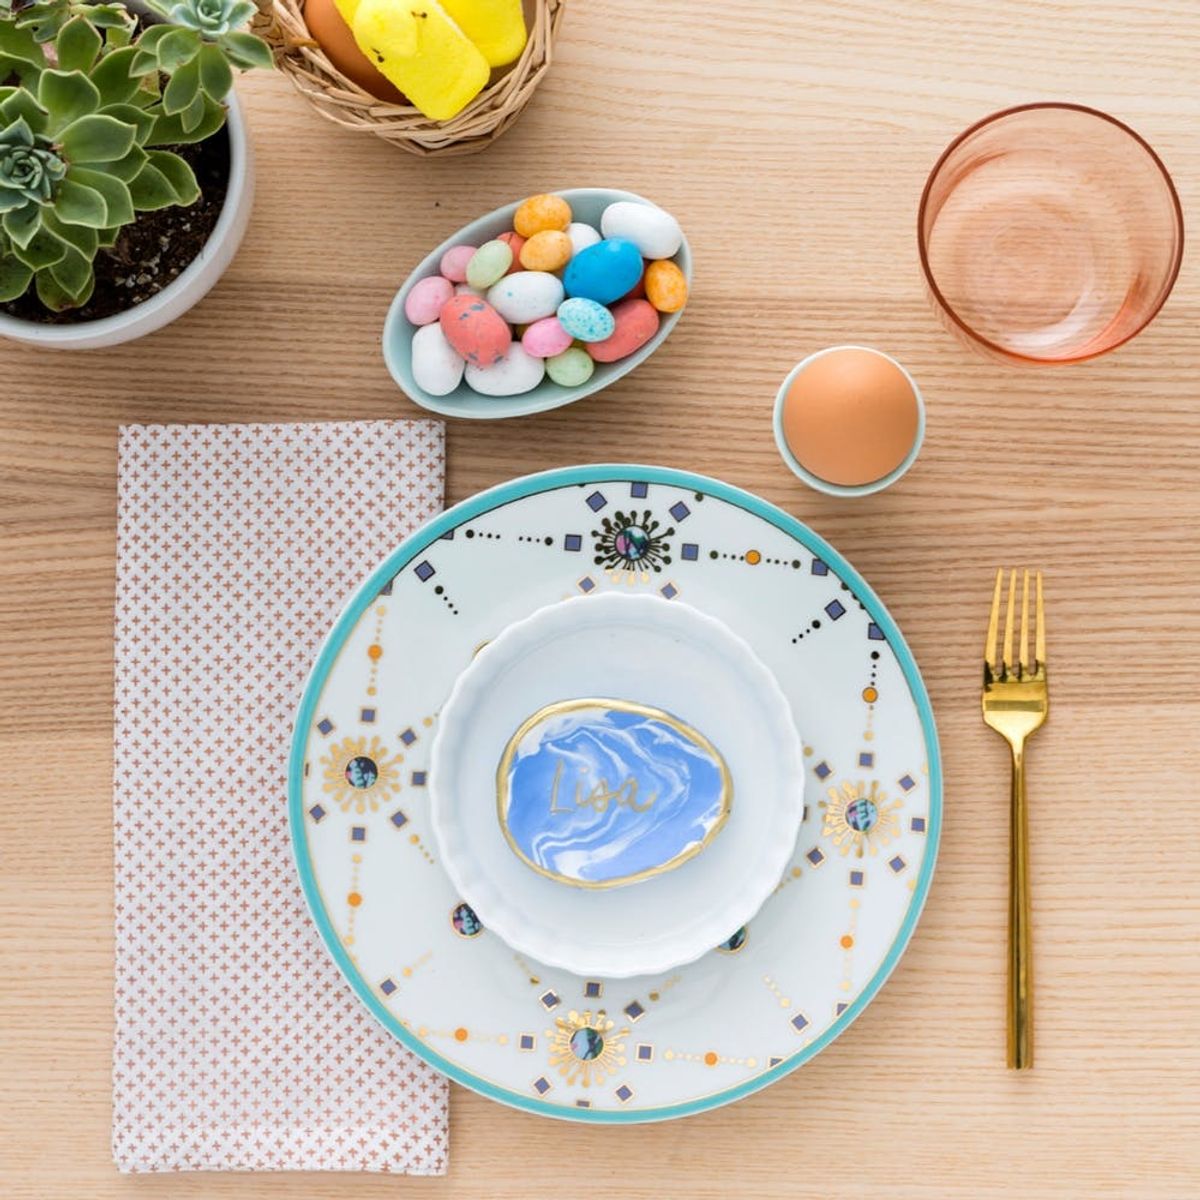 Make a Two-in-One Place Card Jewelry Dish Holder With This Easter DIY